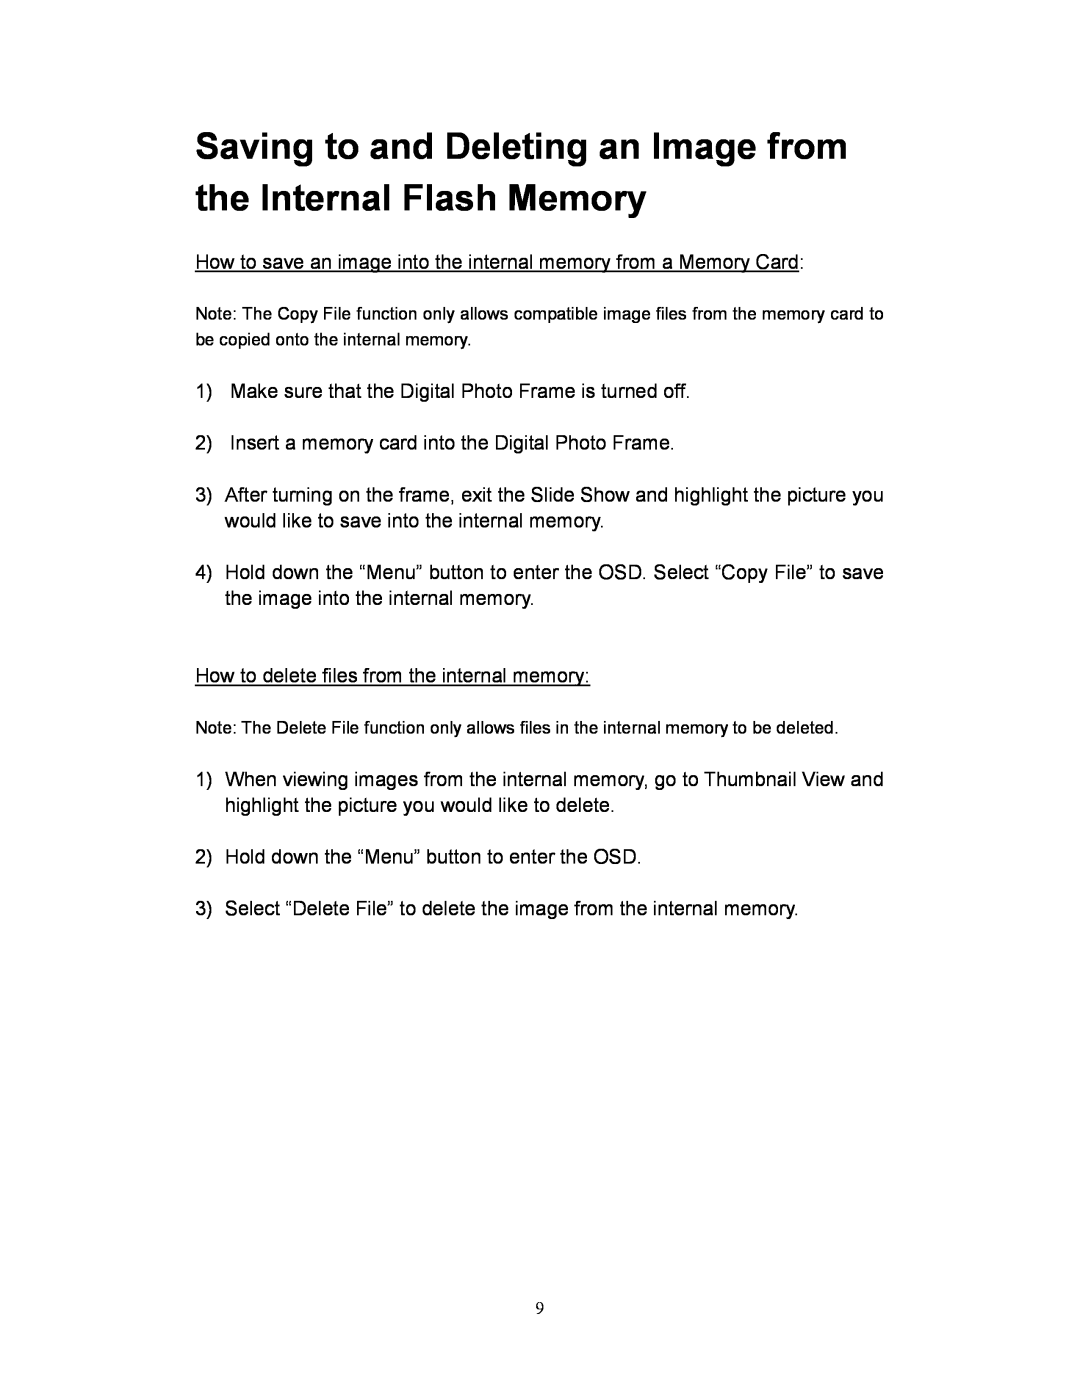 Westinghouse DPF-0701 user manual Saving to and Deleting an Image from the Internal Flash Memory 